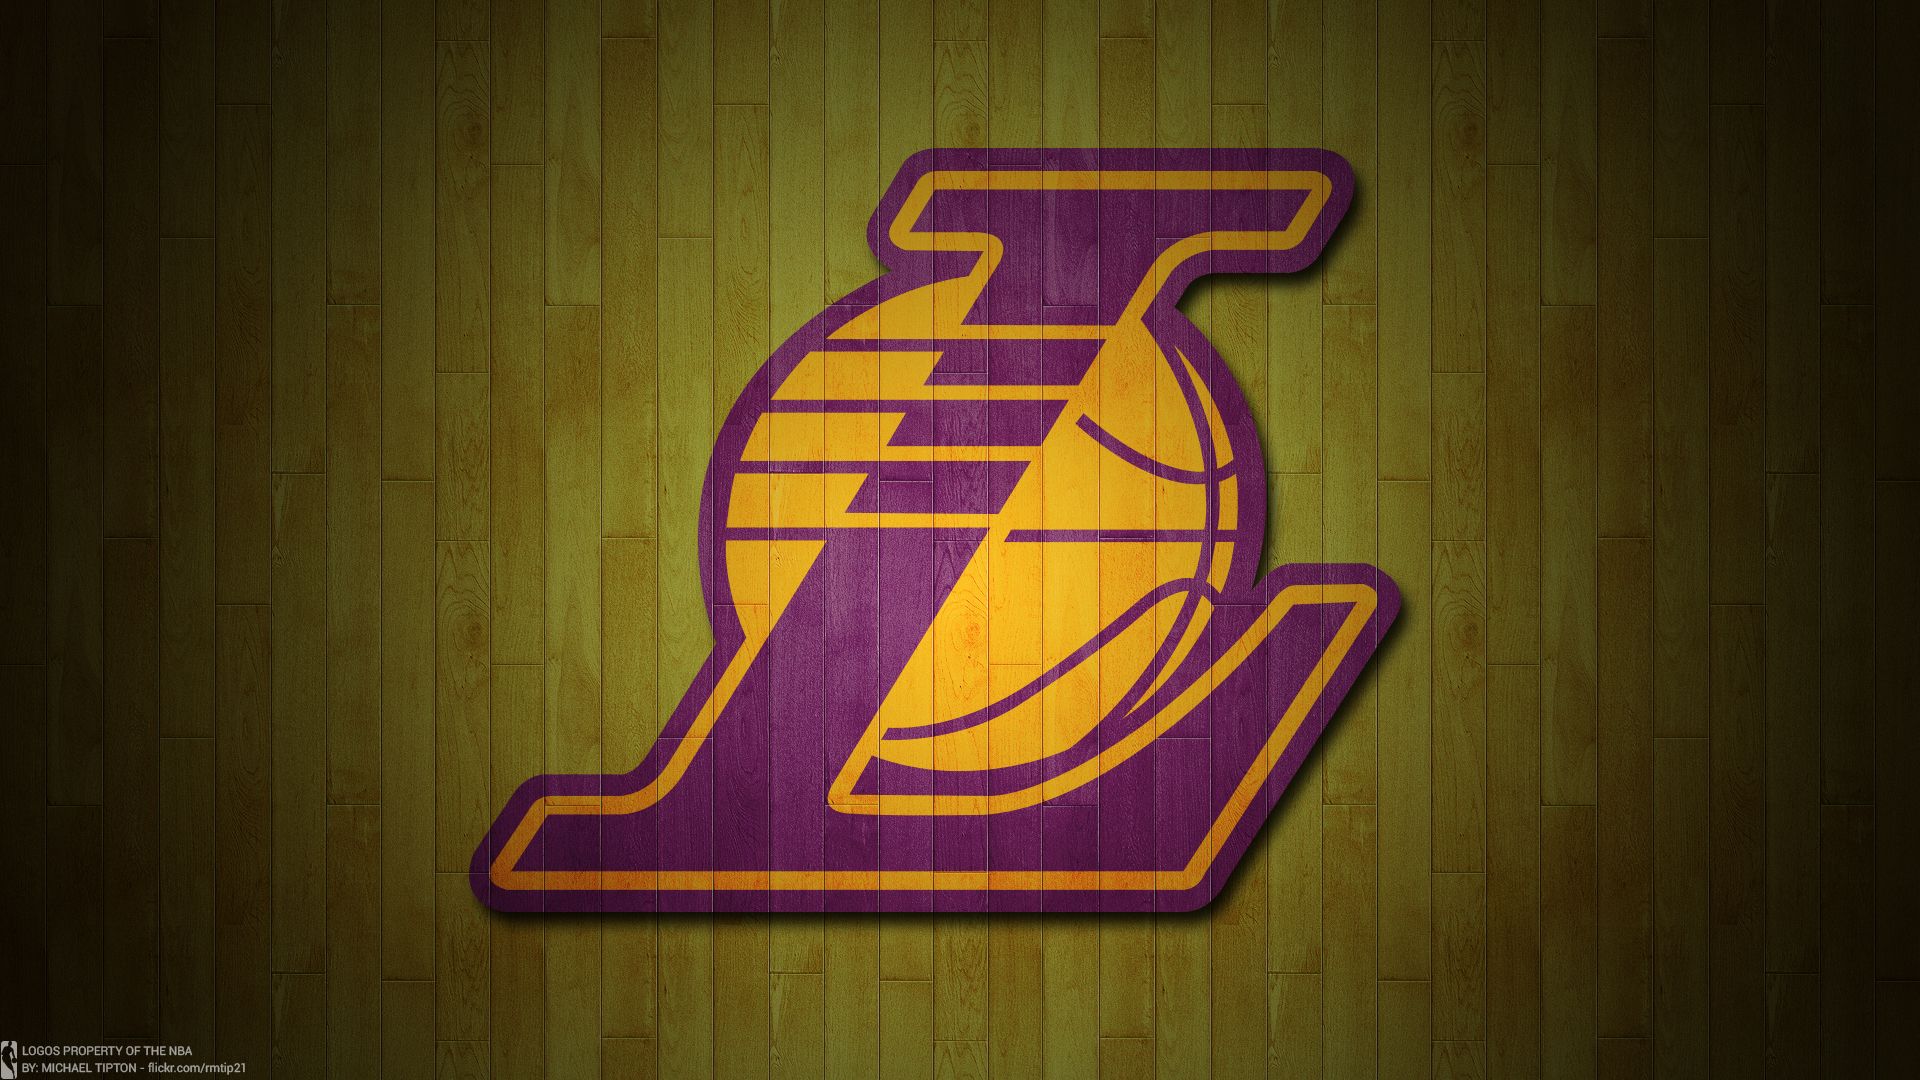 Android Los Angeles Lakers Wallpapers | Full HD Pictures